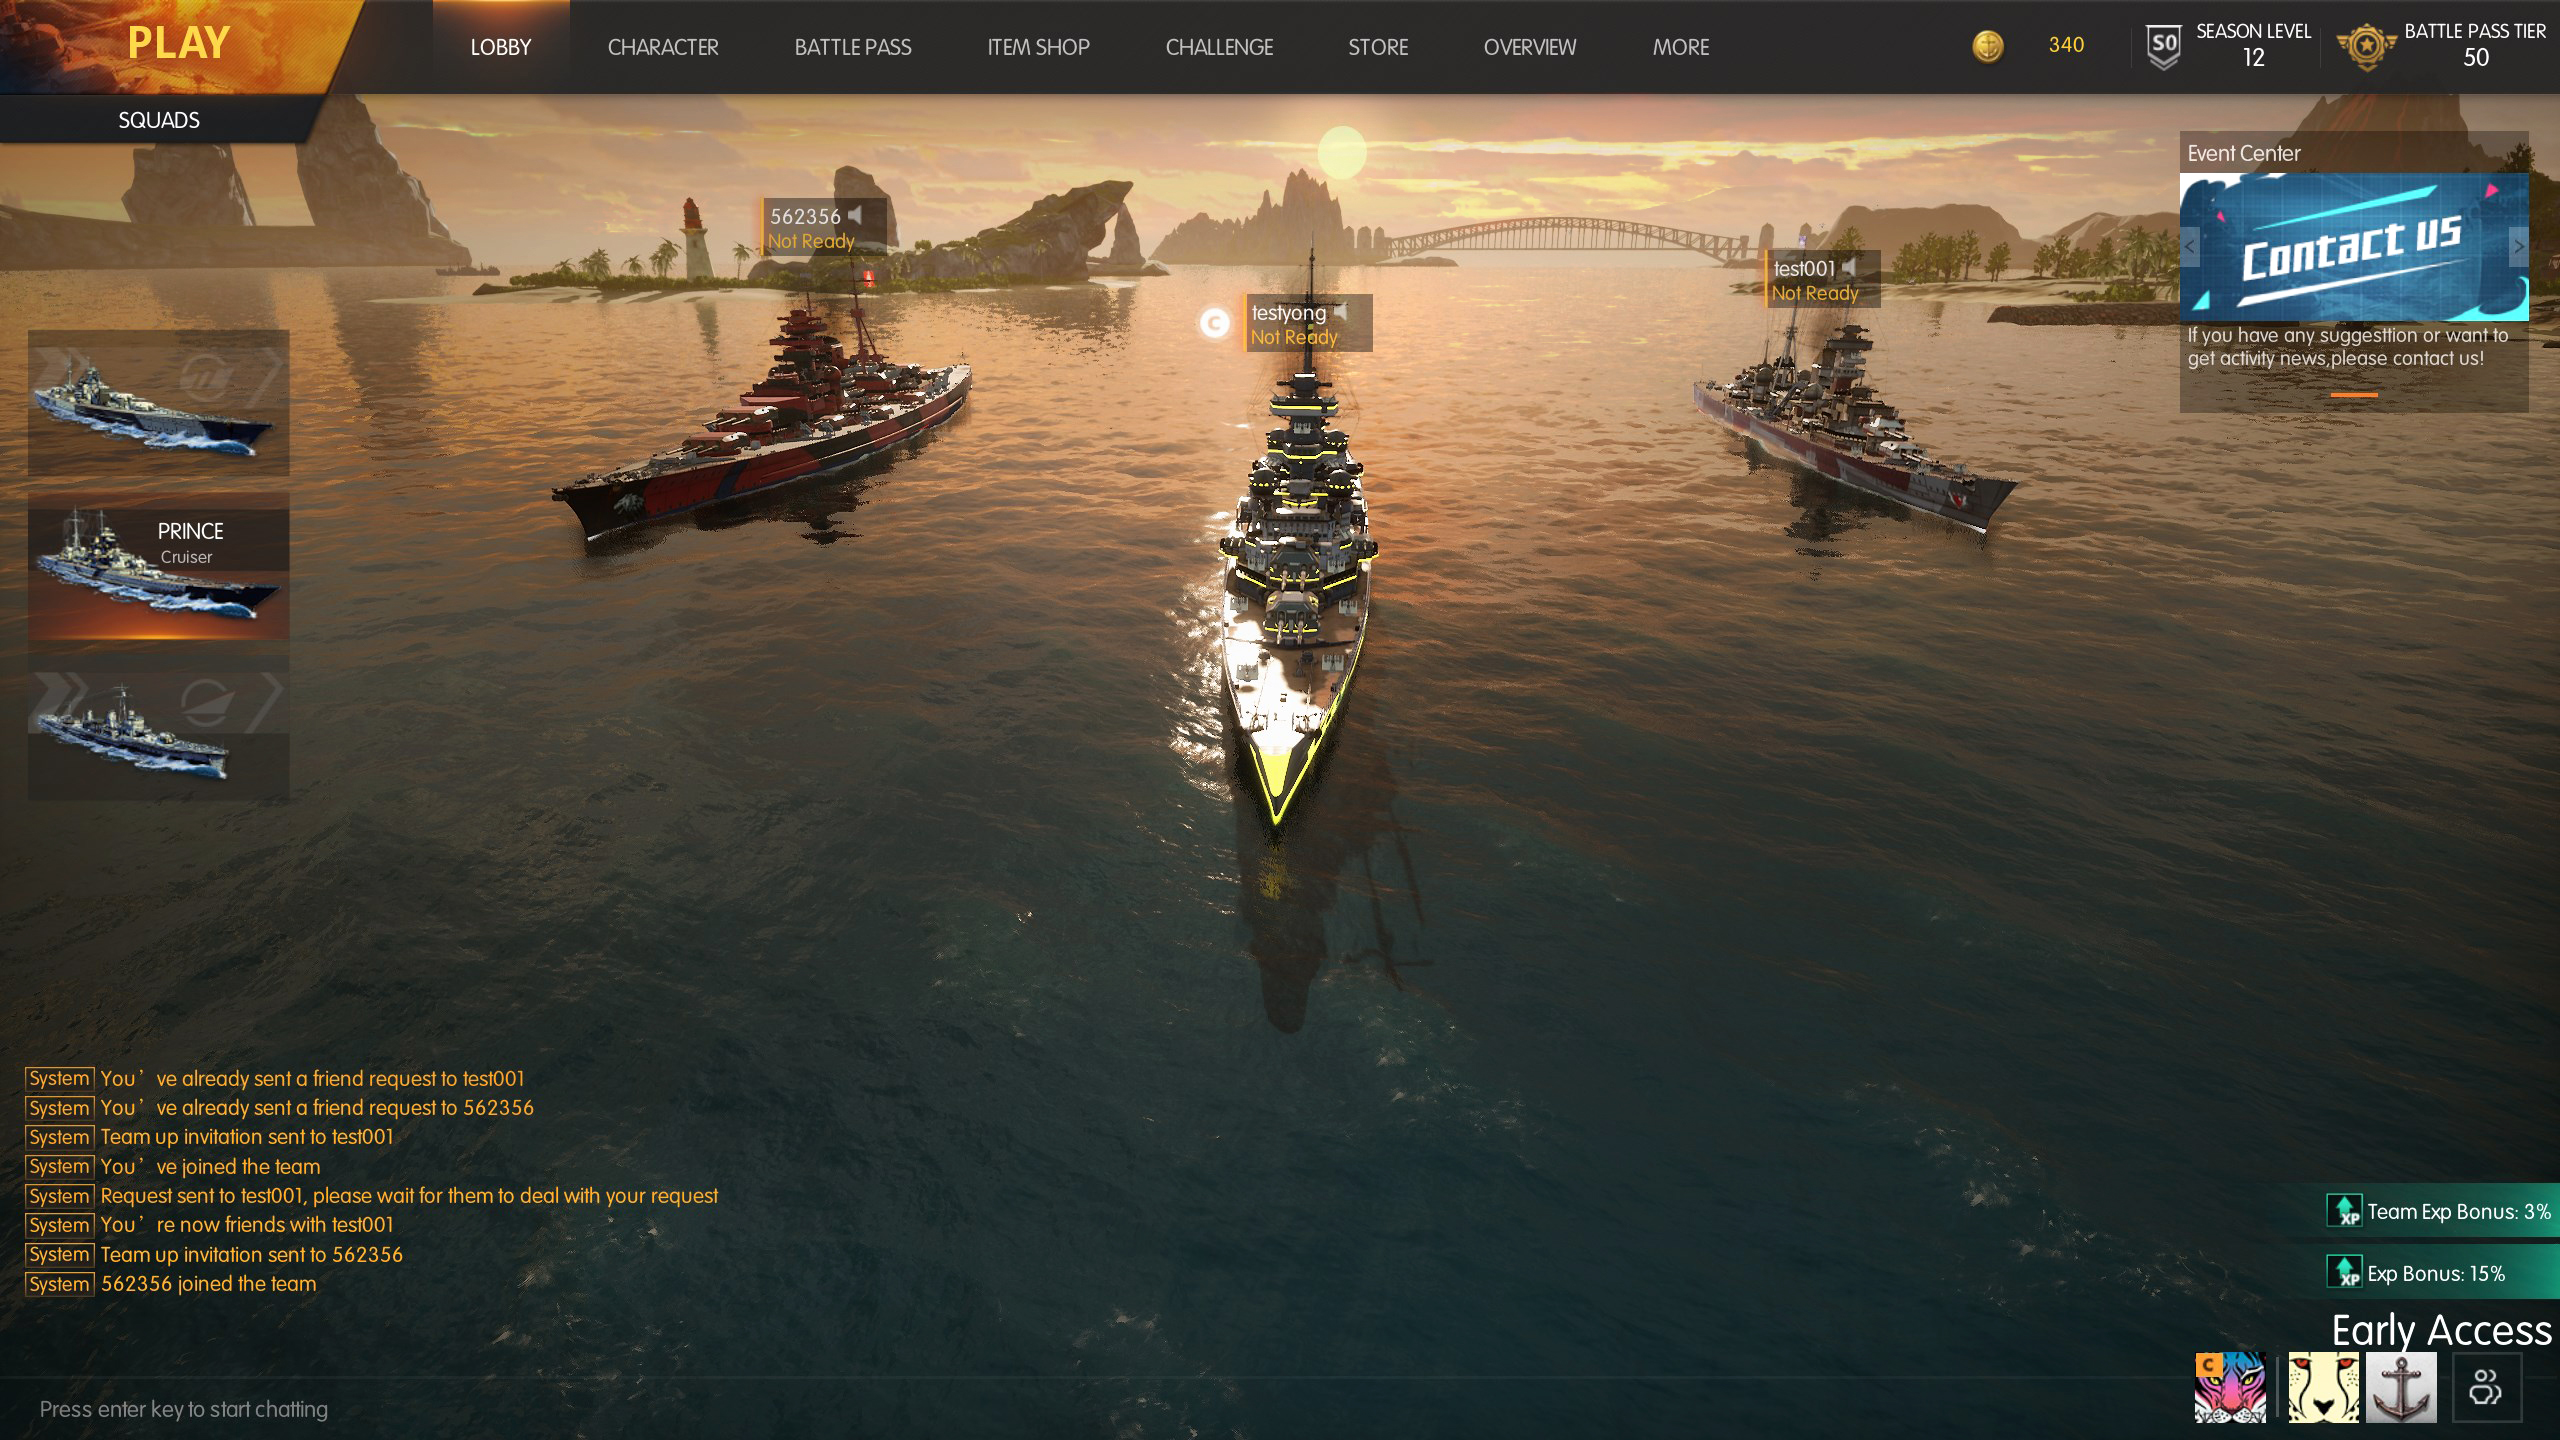 hpw to login world of warship with steam